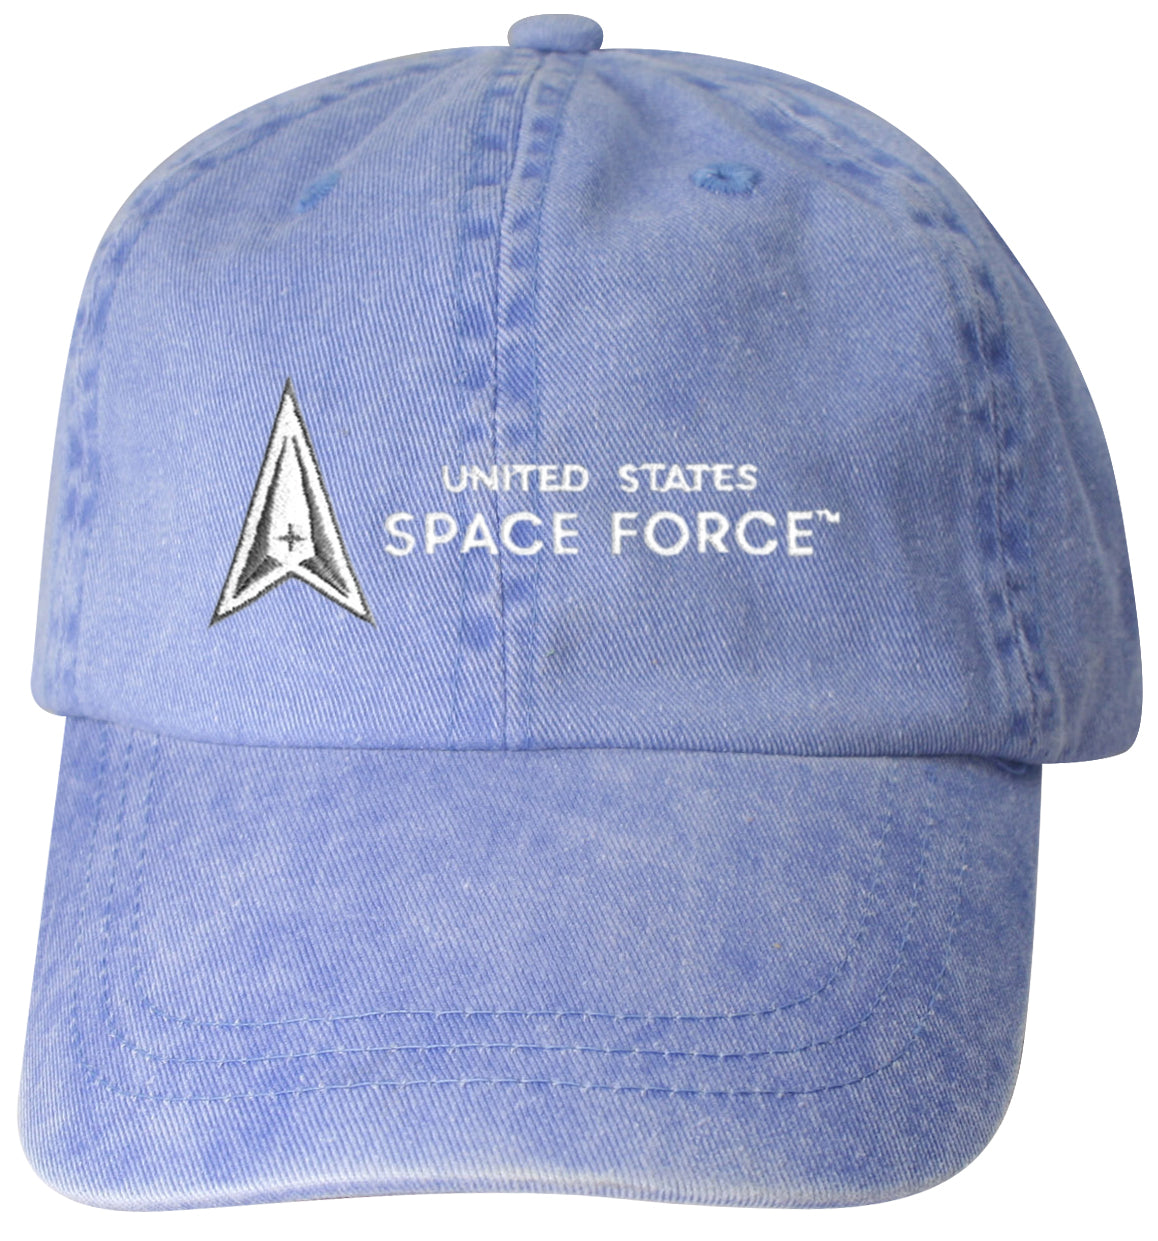 United States Space Force Design on Kids Youth Ball Cap